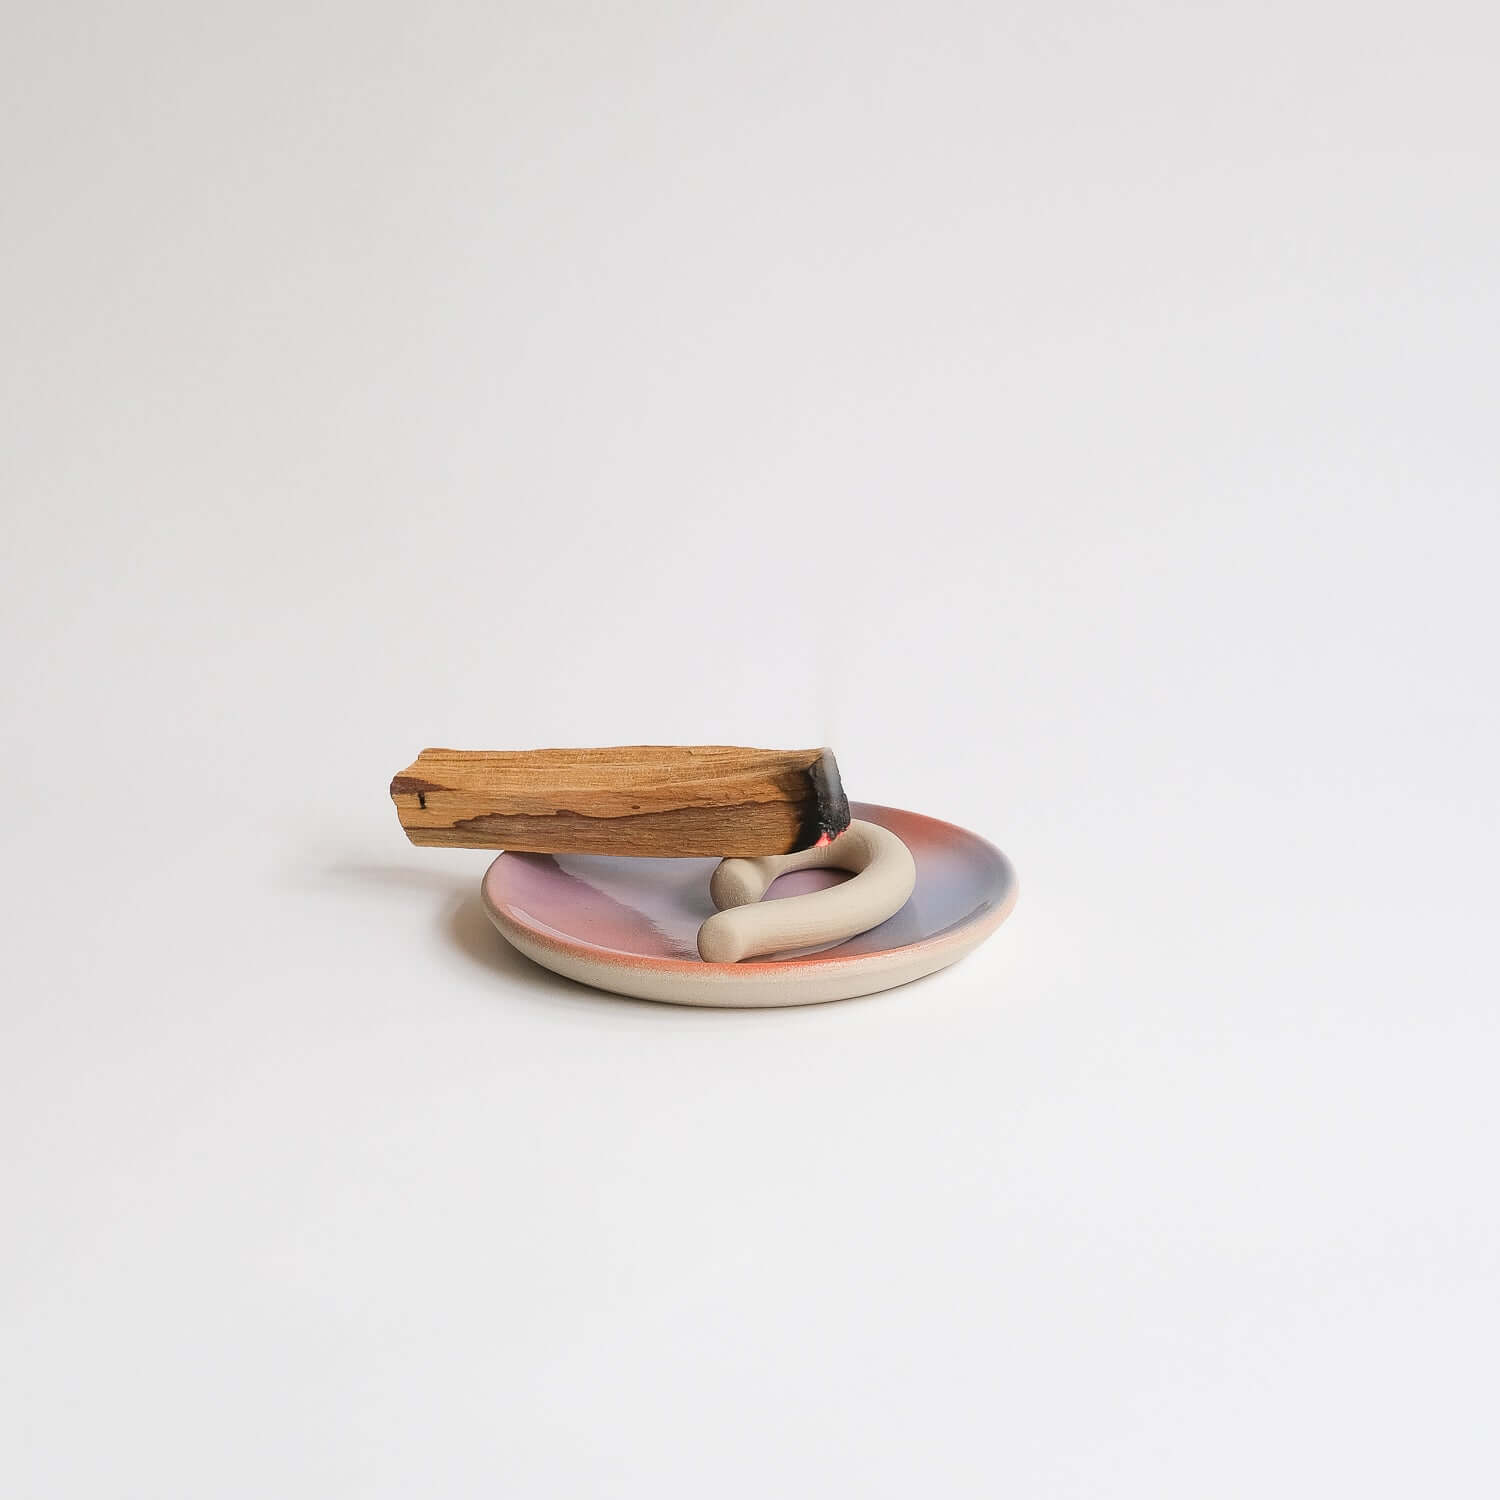 Elevate your space with our Dawn Special Edition dish set in bright colors. Includes unique holder and Palo Santo sticks. von viola beuscher ceramics